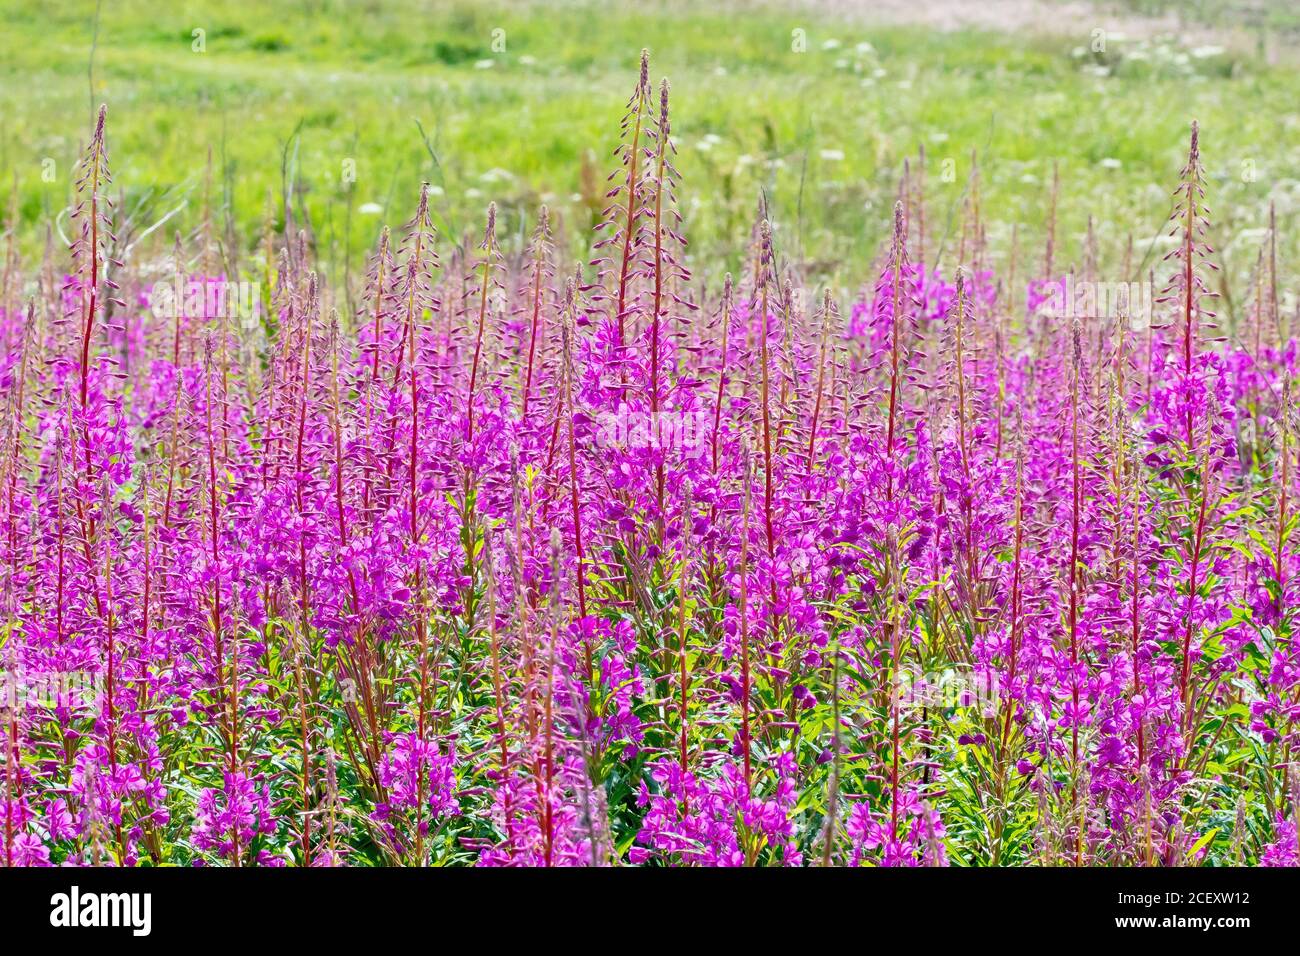 Rosebay Willowherb (epilobium, chamaenerion, or chamerion angustifolium), a stand of the tall pink flowers at the edge of a field. Stock Photo